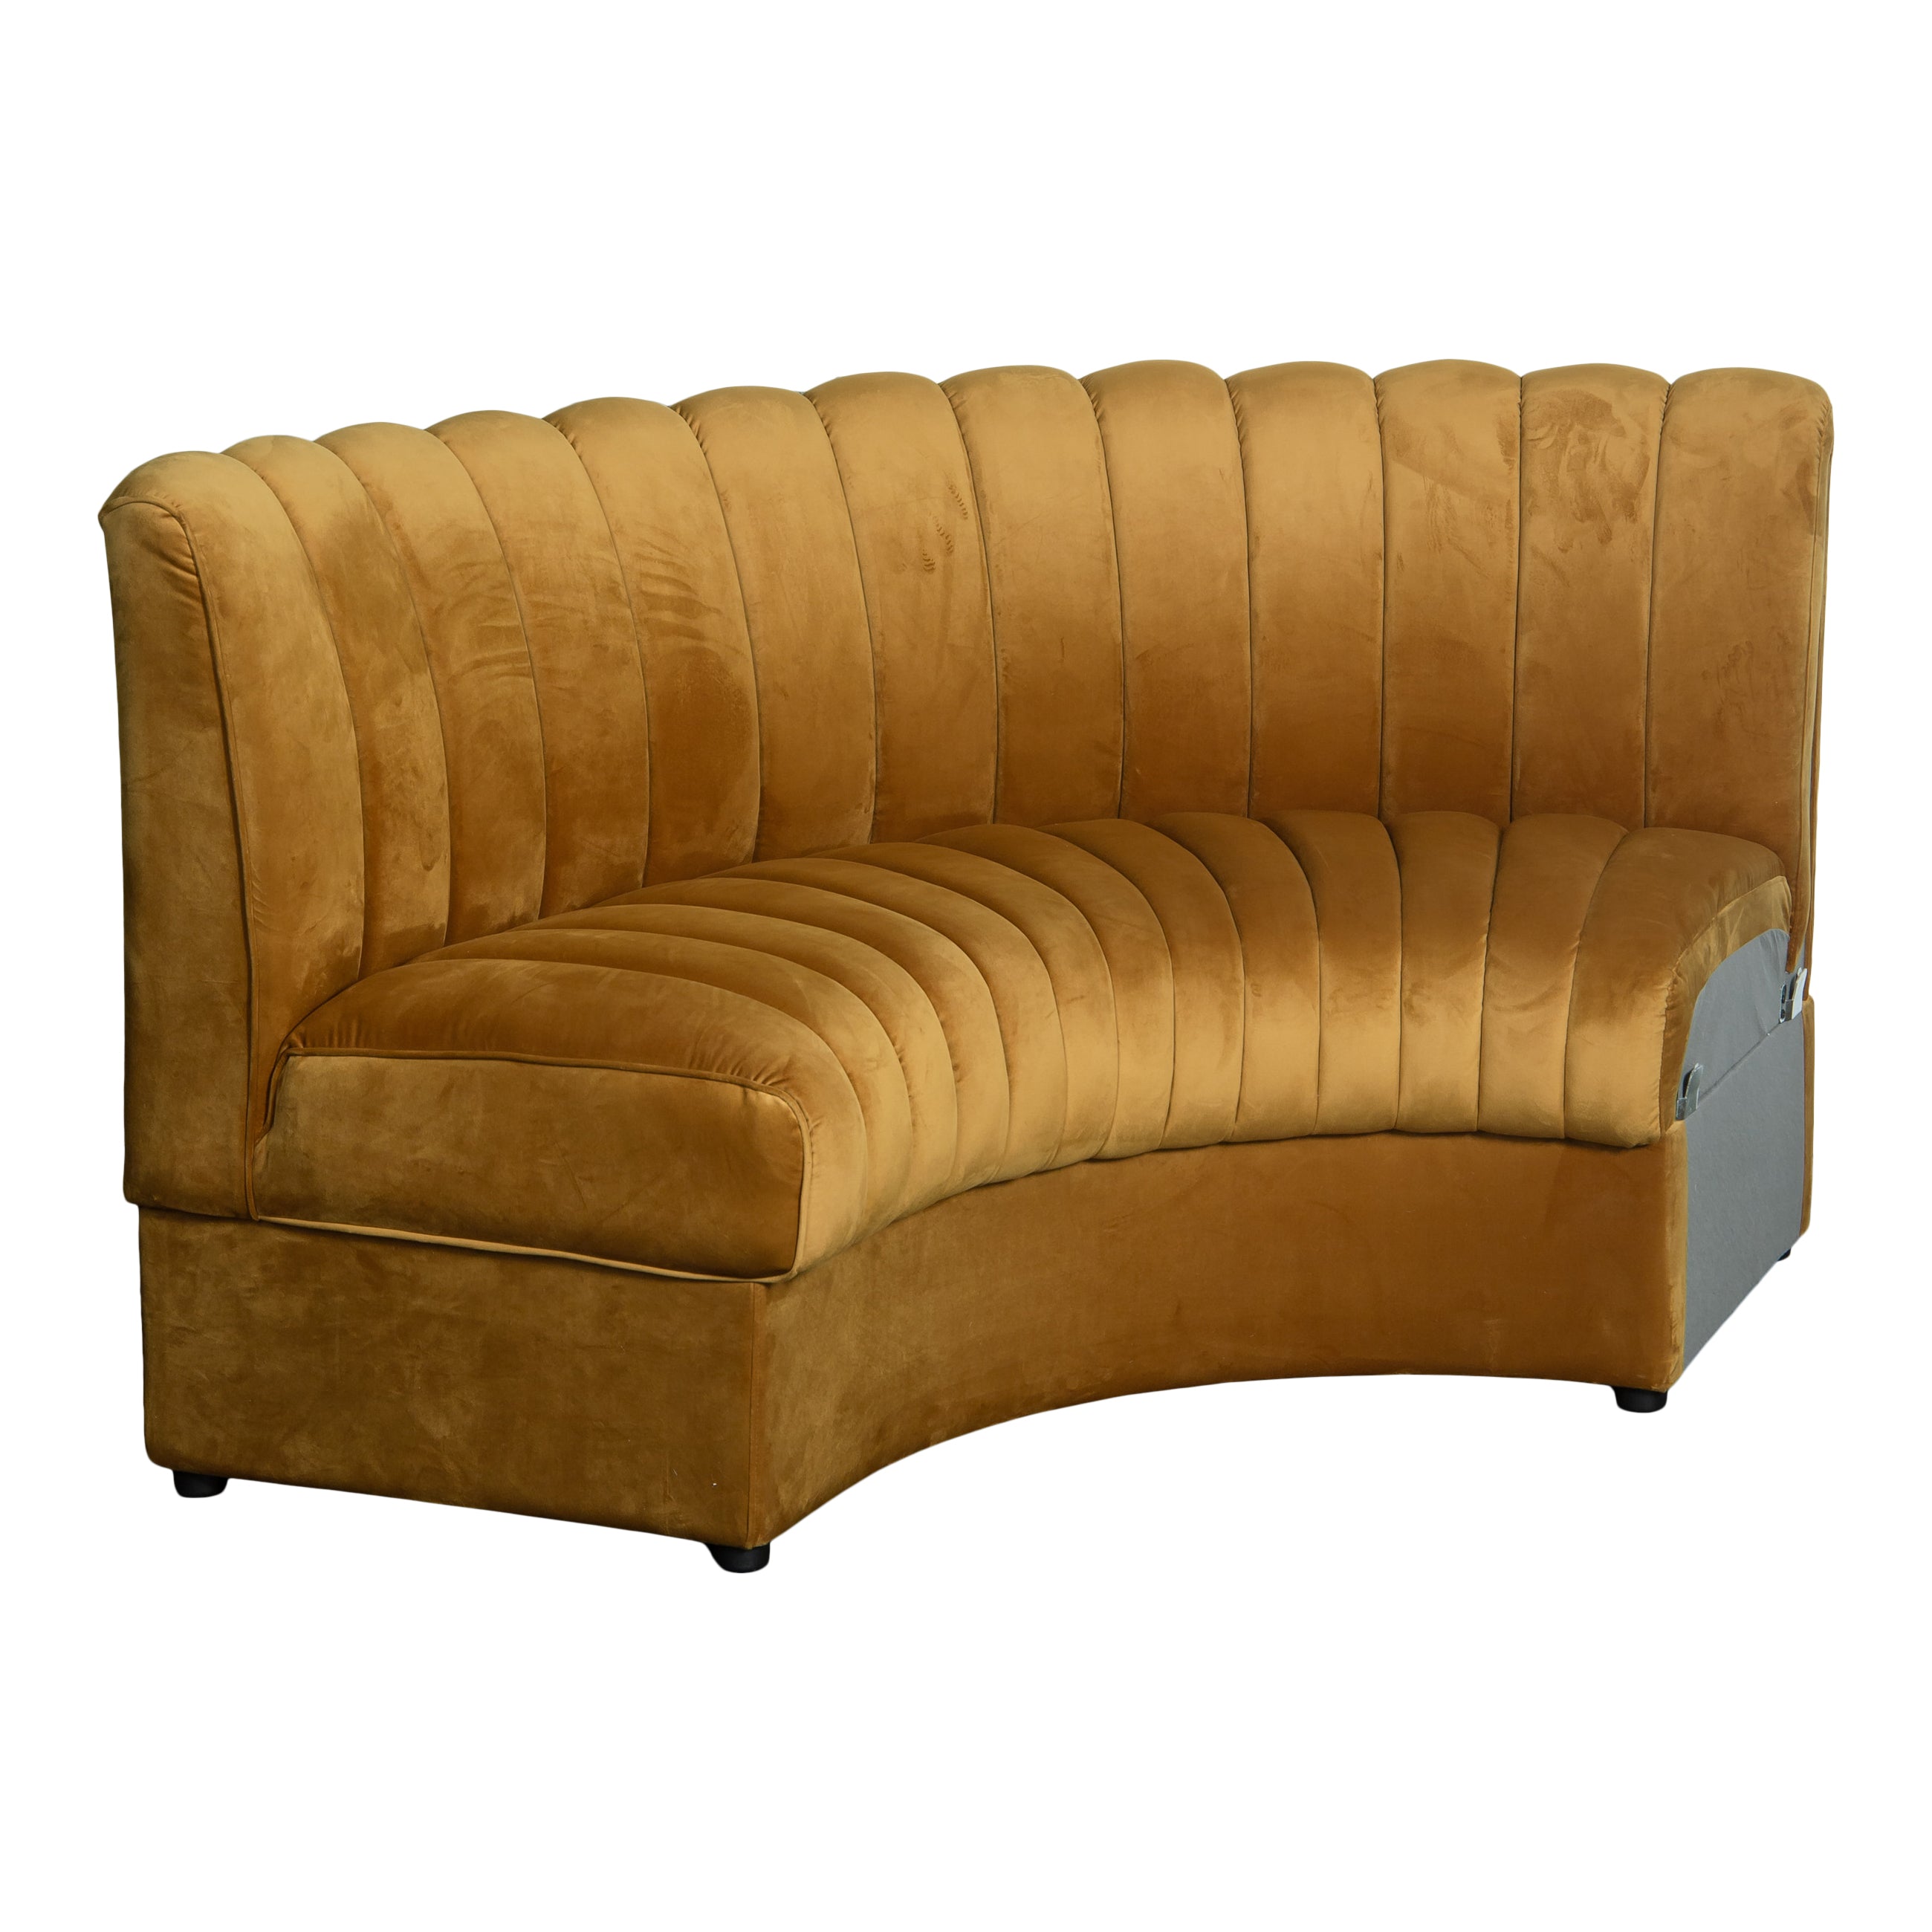 Louise Gold Banquette Couch